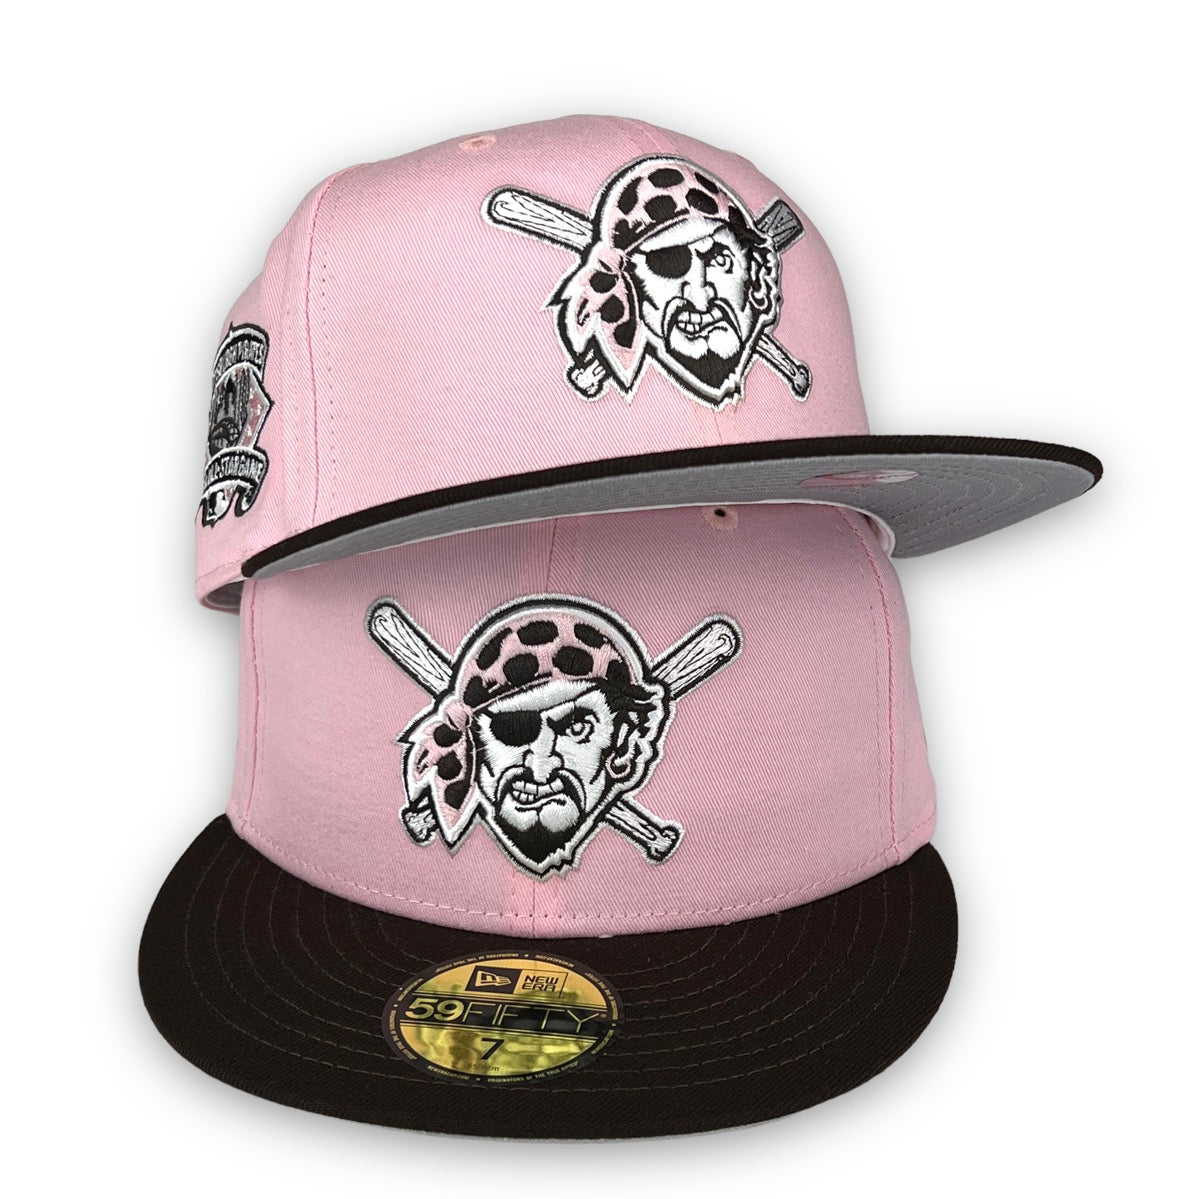 New Era Pittsburgh Pirates All Star Game 1994 Two Tone Prime Edition  59Fifty Fitted Hat, EXCLUSIVE HATS, CAPS